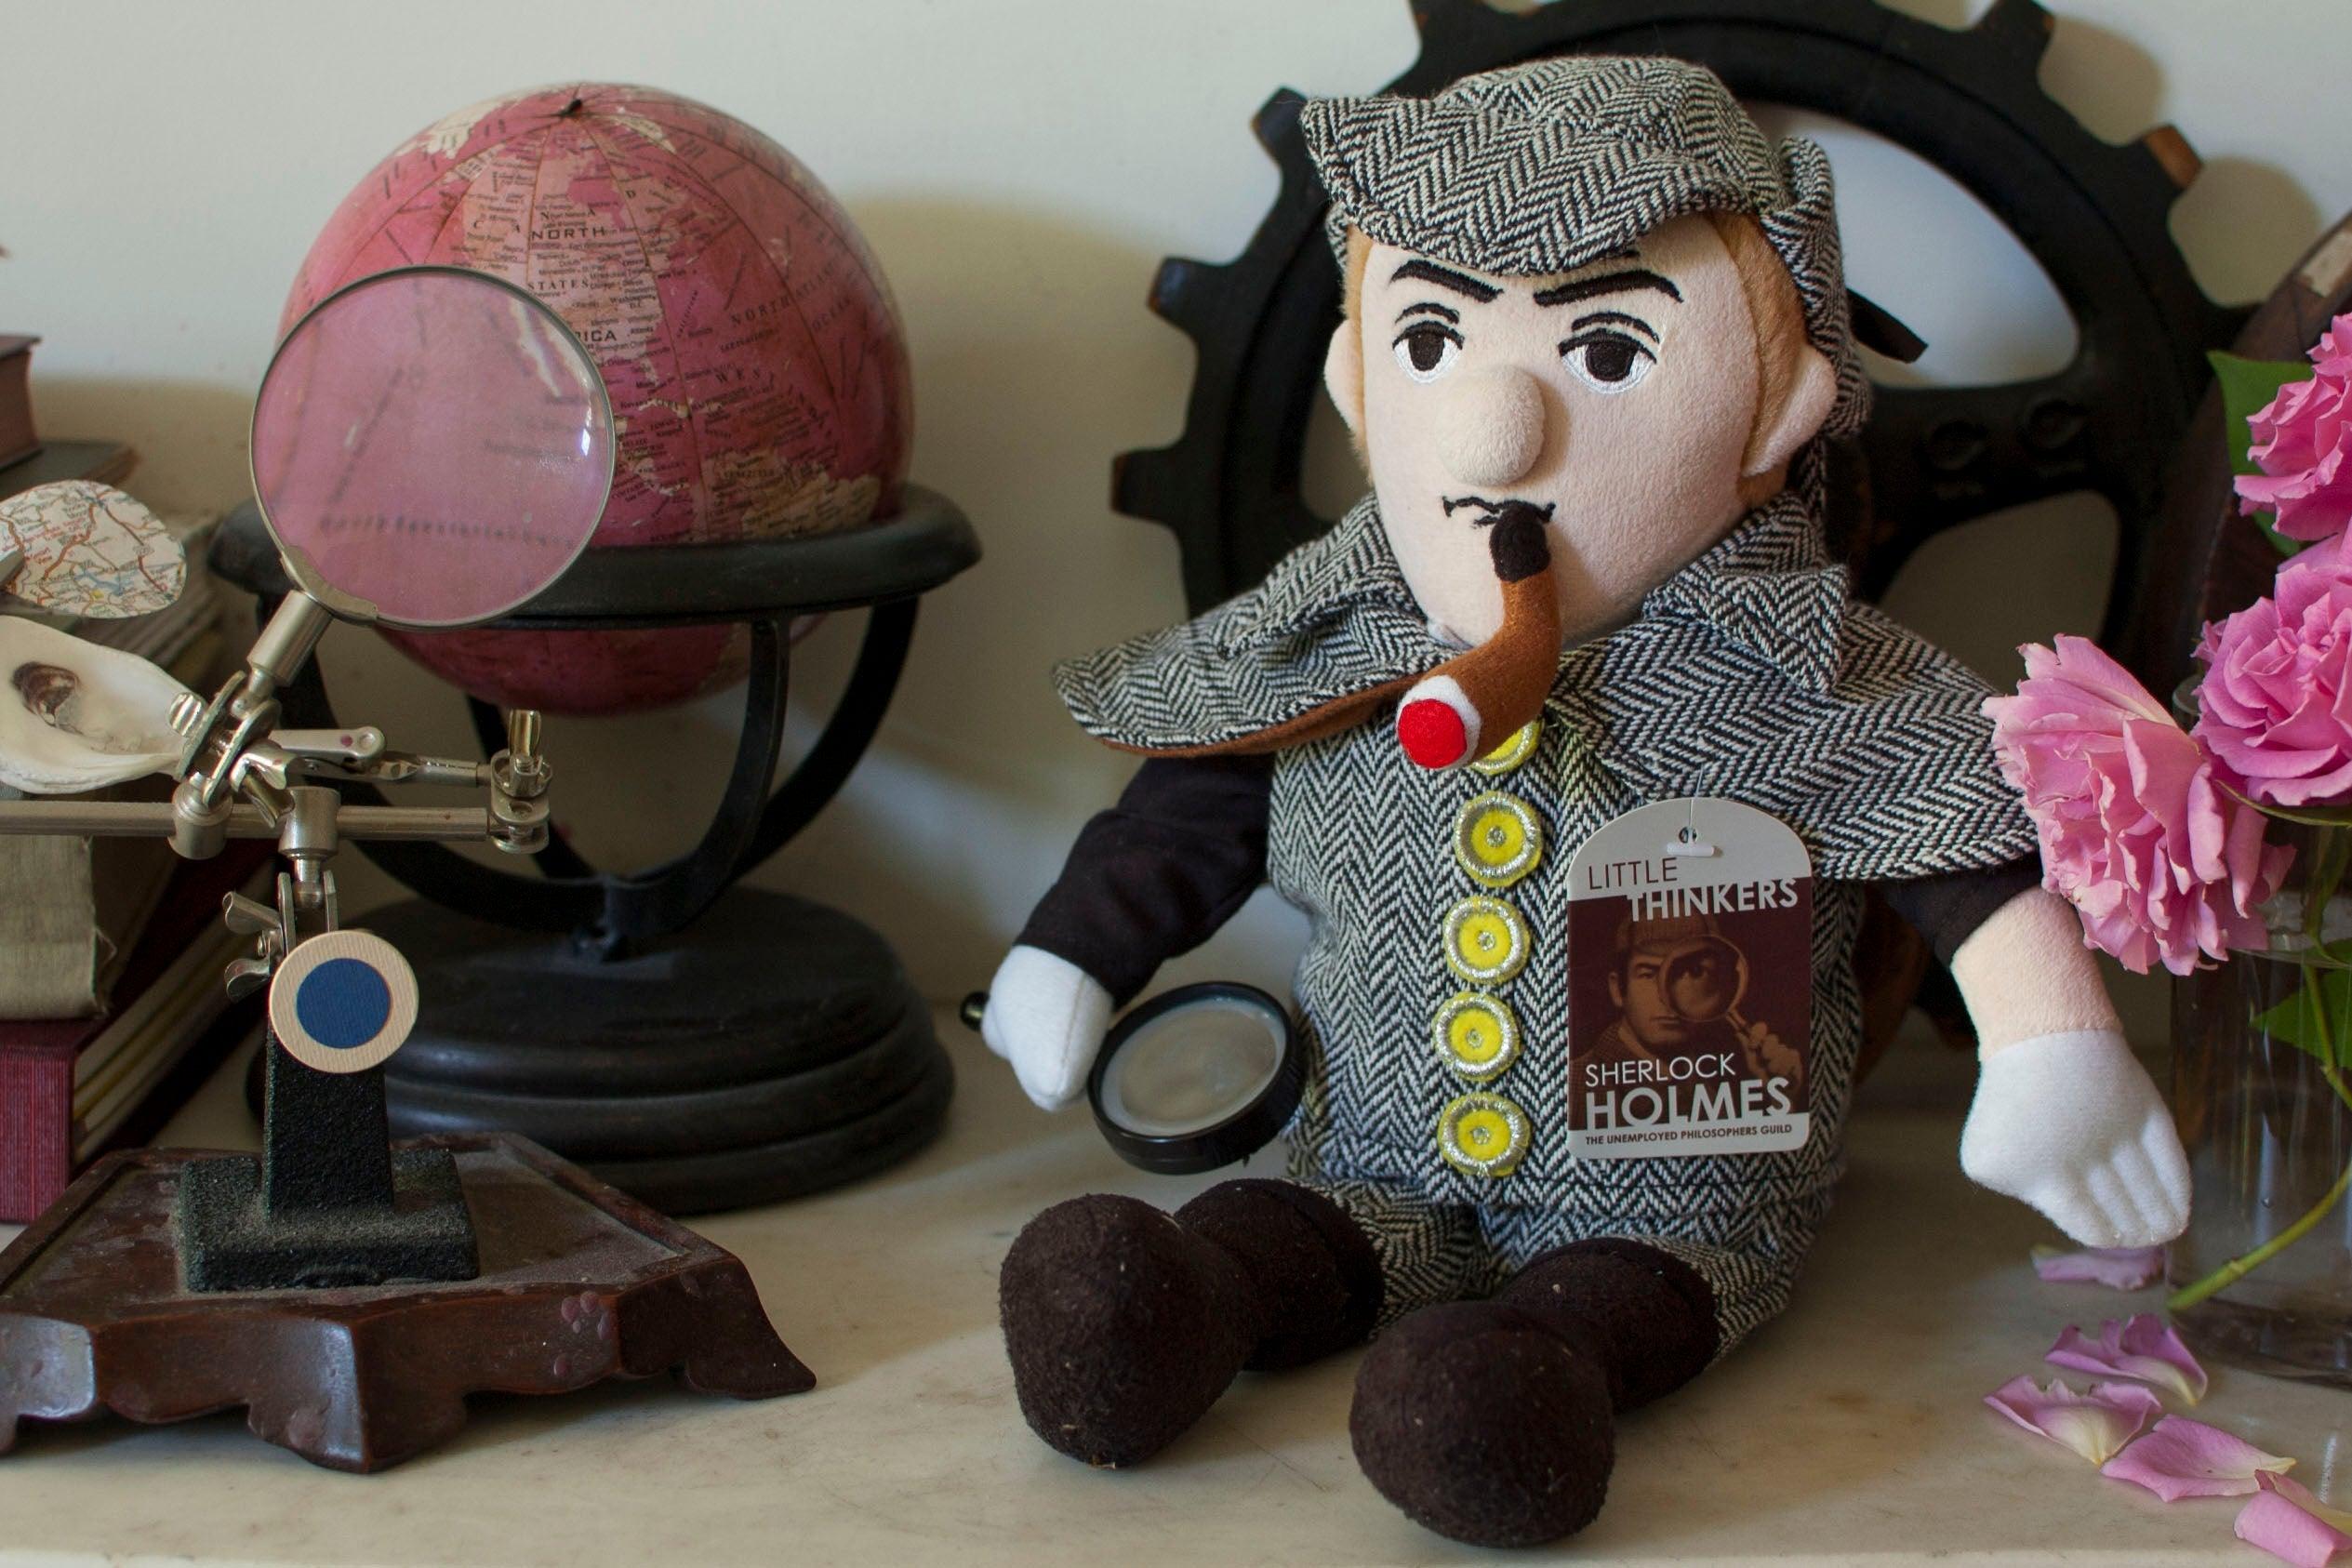 Product photo of Sherlock Holmes Plush Doll, a novelty gift manufactured by The Unemployed Philosophers Guild.